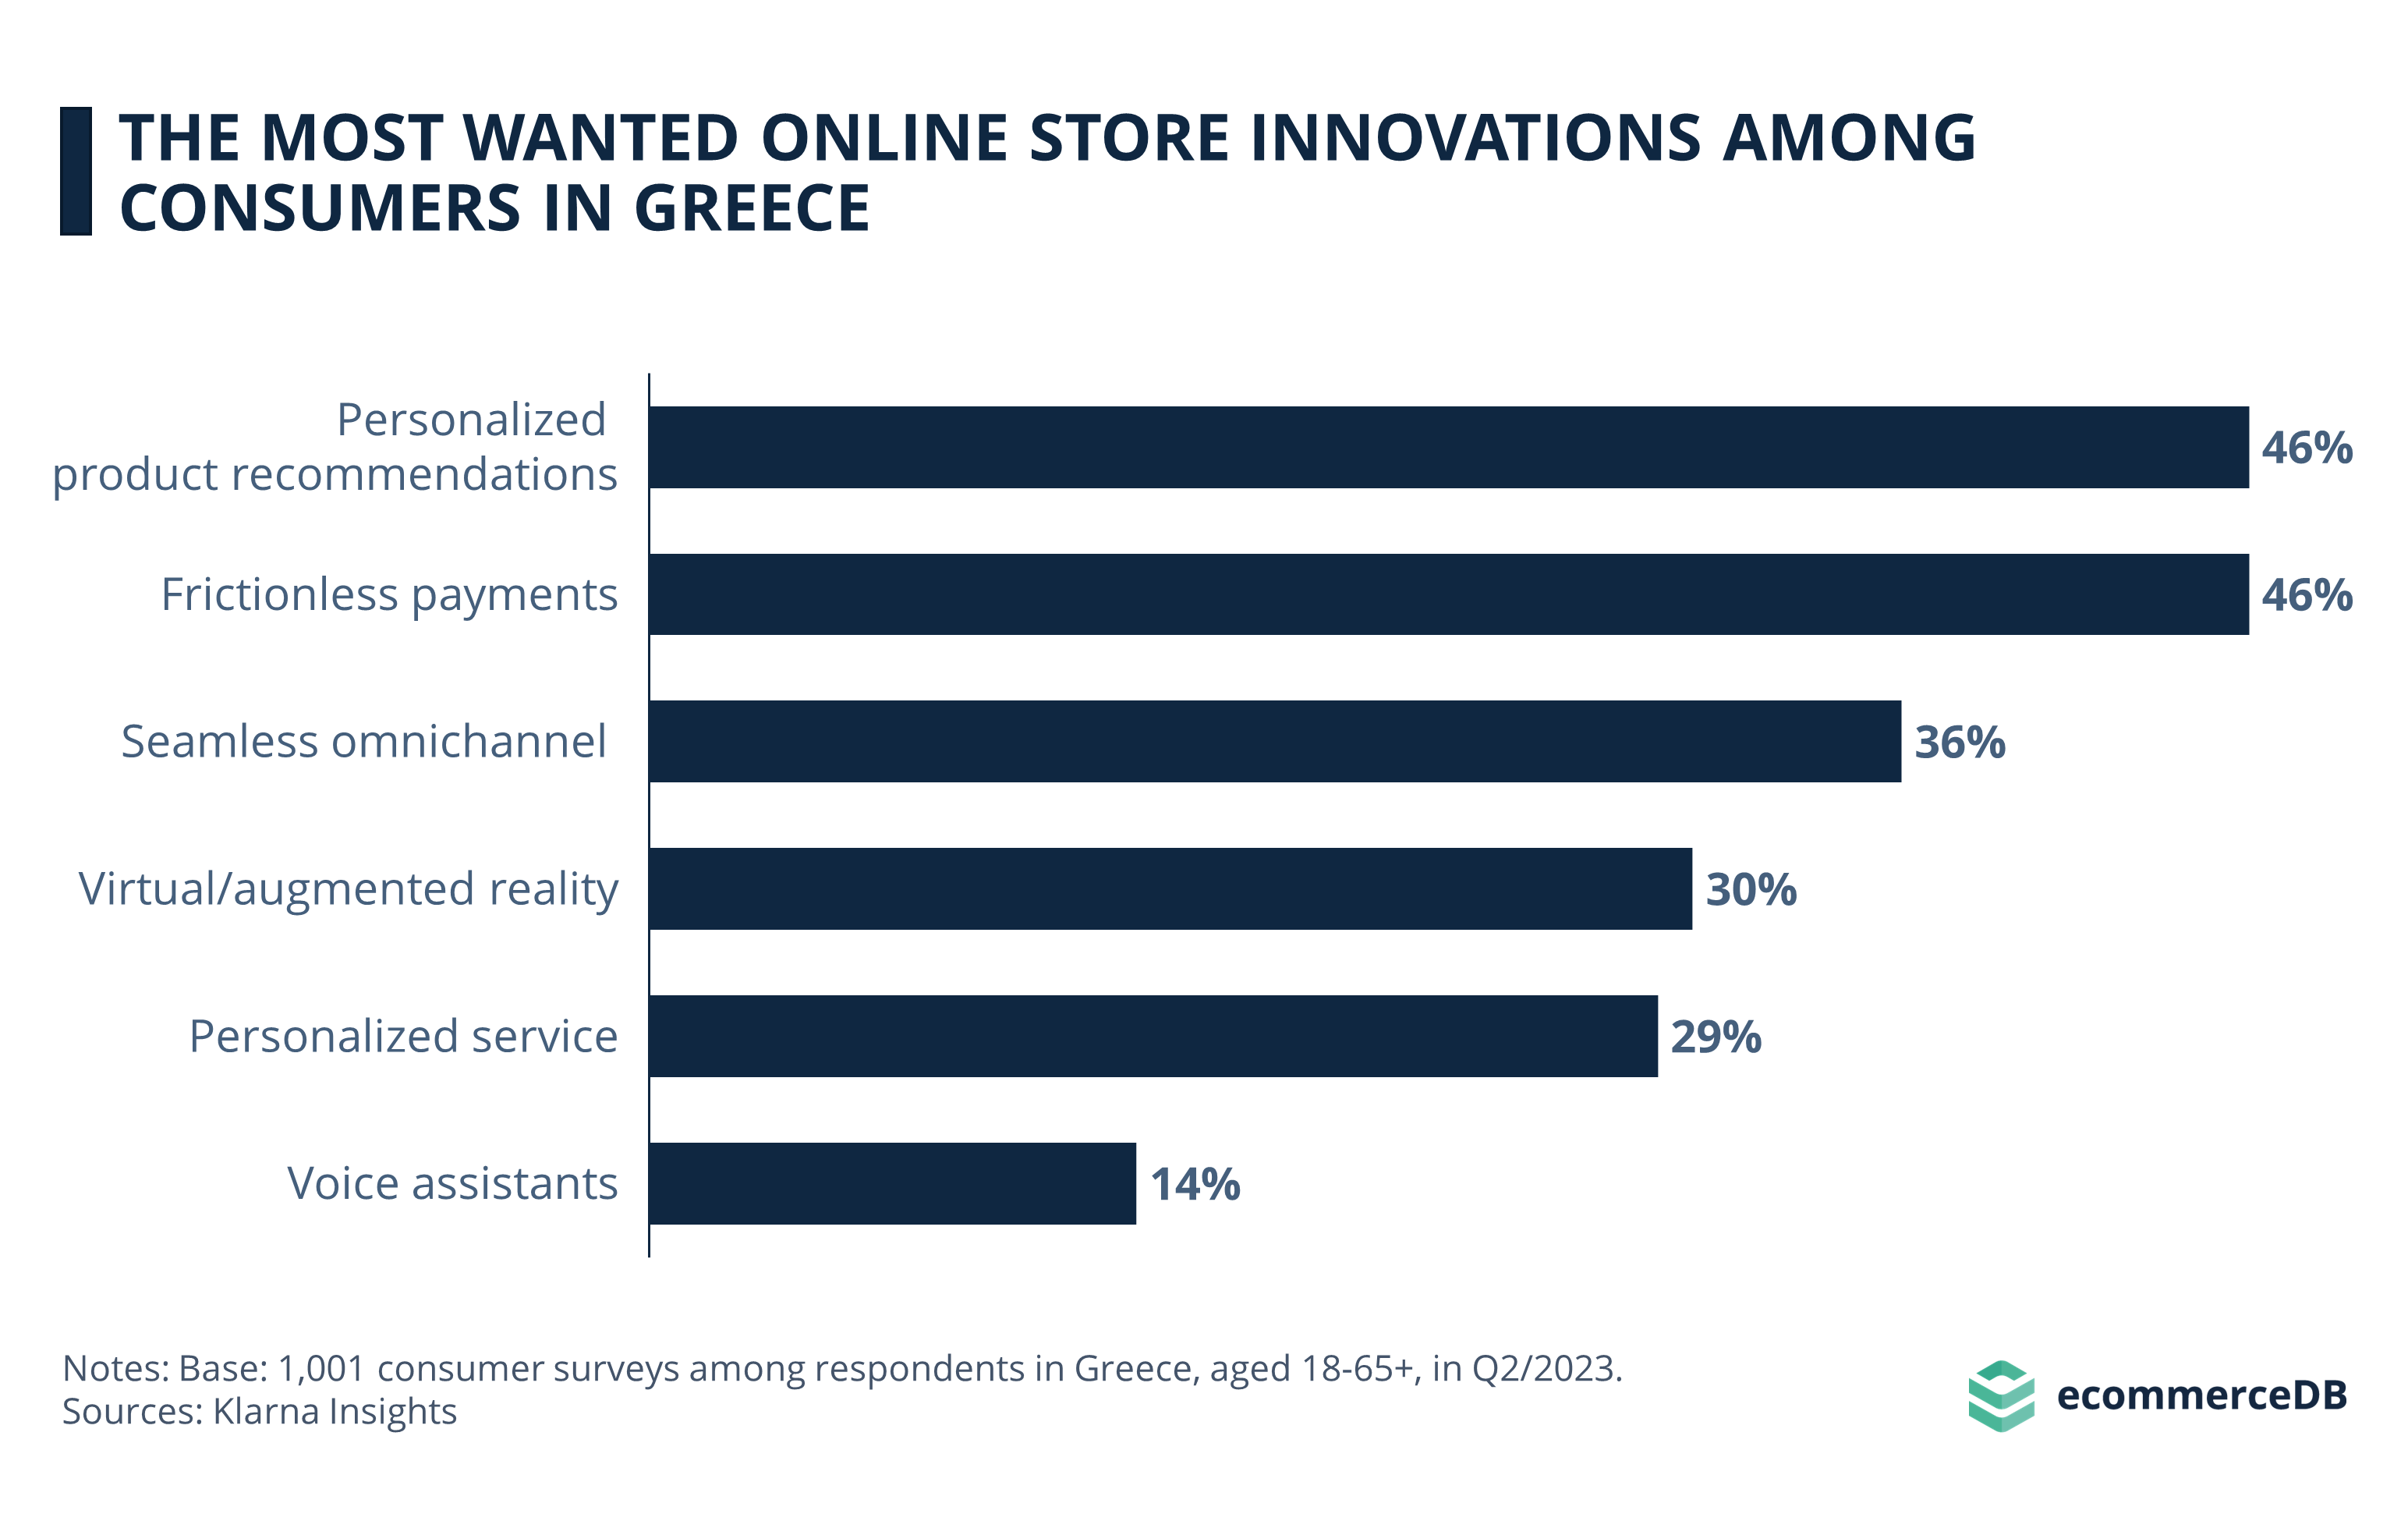 Greeks' Most Wanted Innovations in Online Shopping 2022